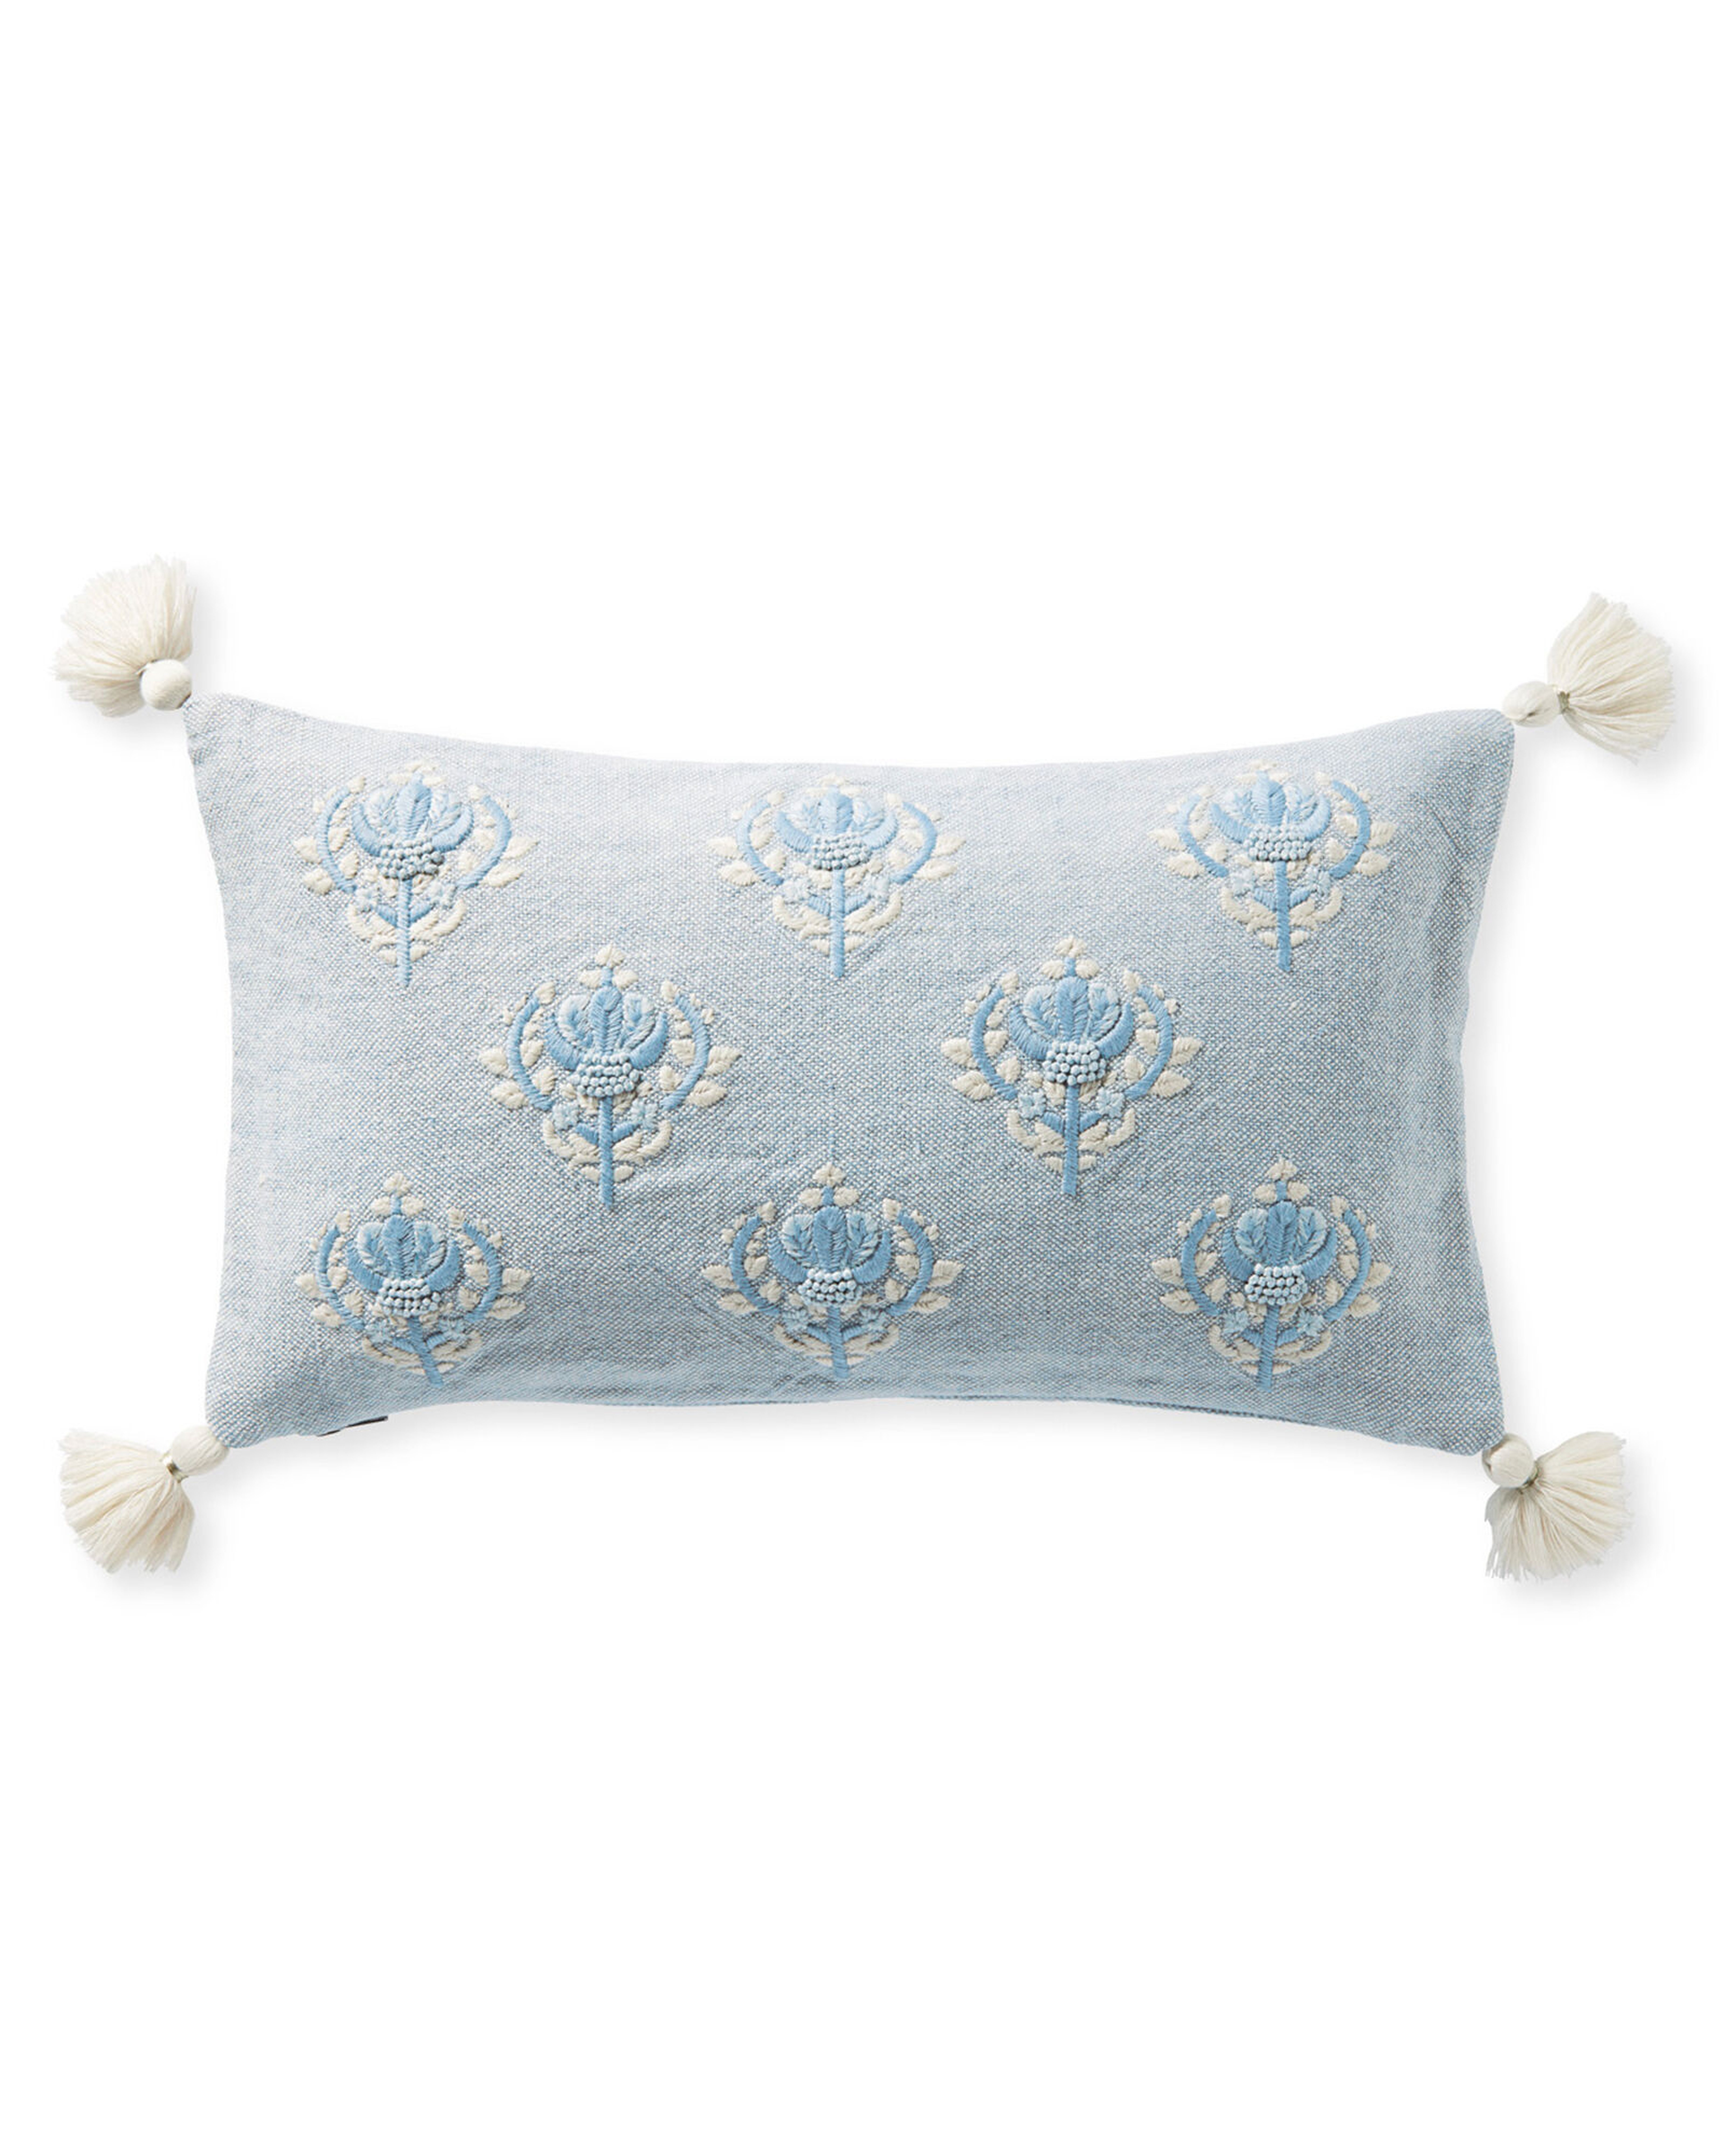 Kemp Pillow Cover - Serena and Lily